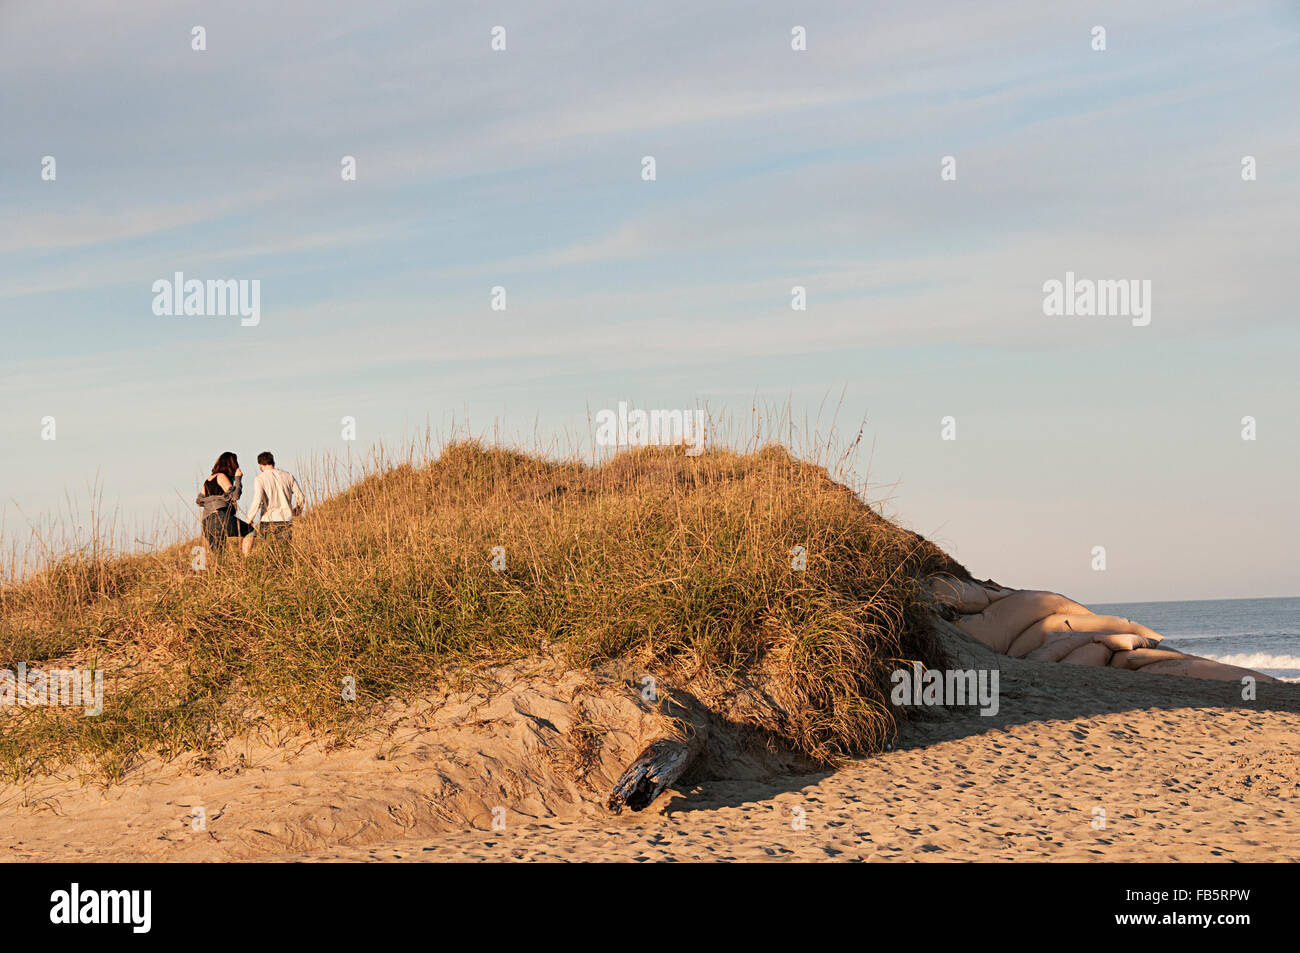 A couple climbing on a sand dune on Cape Hattaras, North Carolina in the Outer Banks. Stock Photo